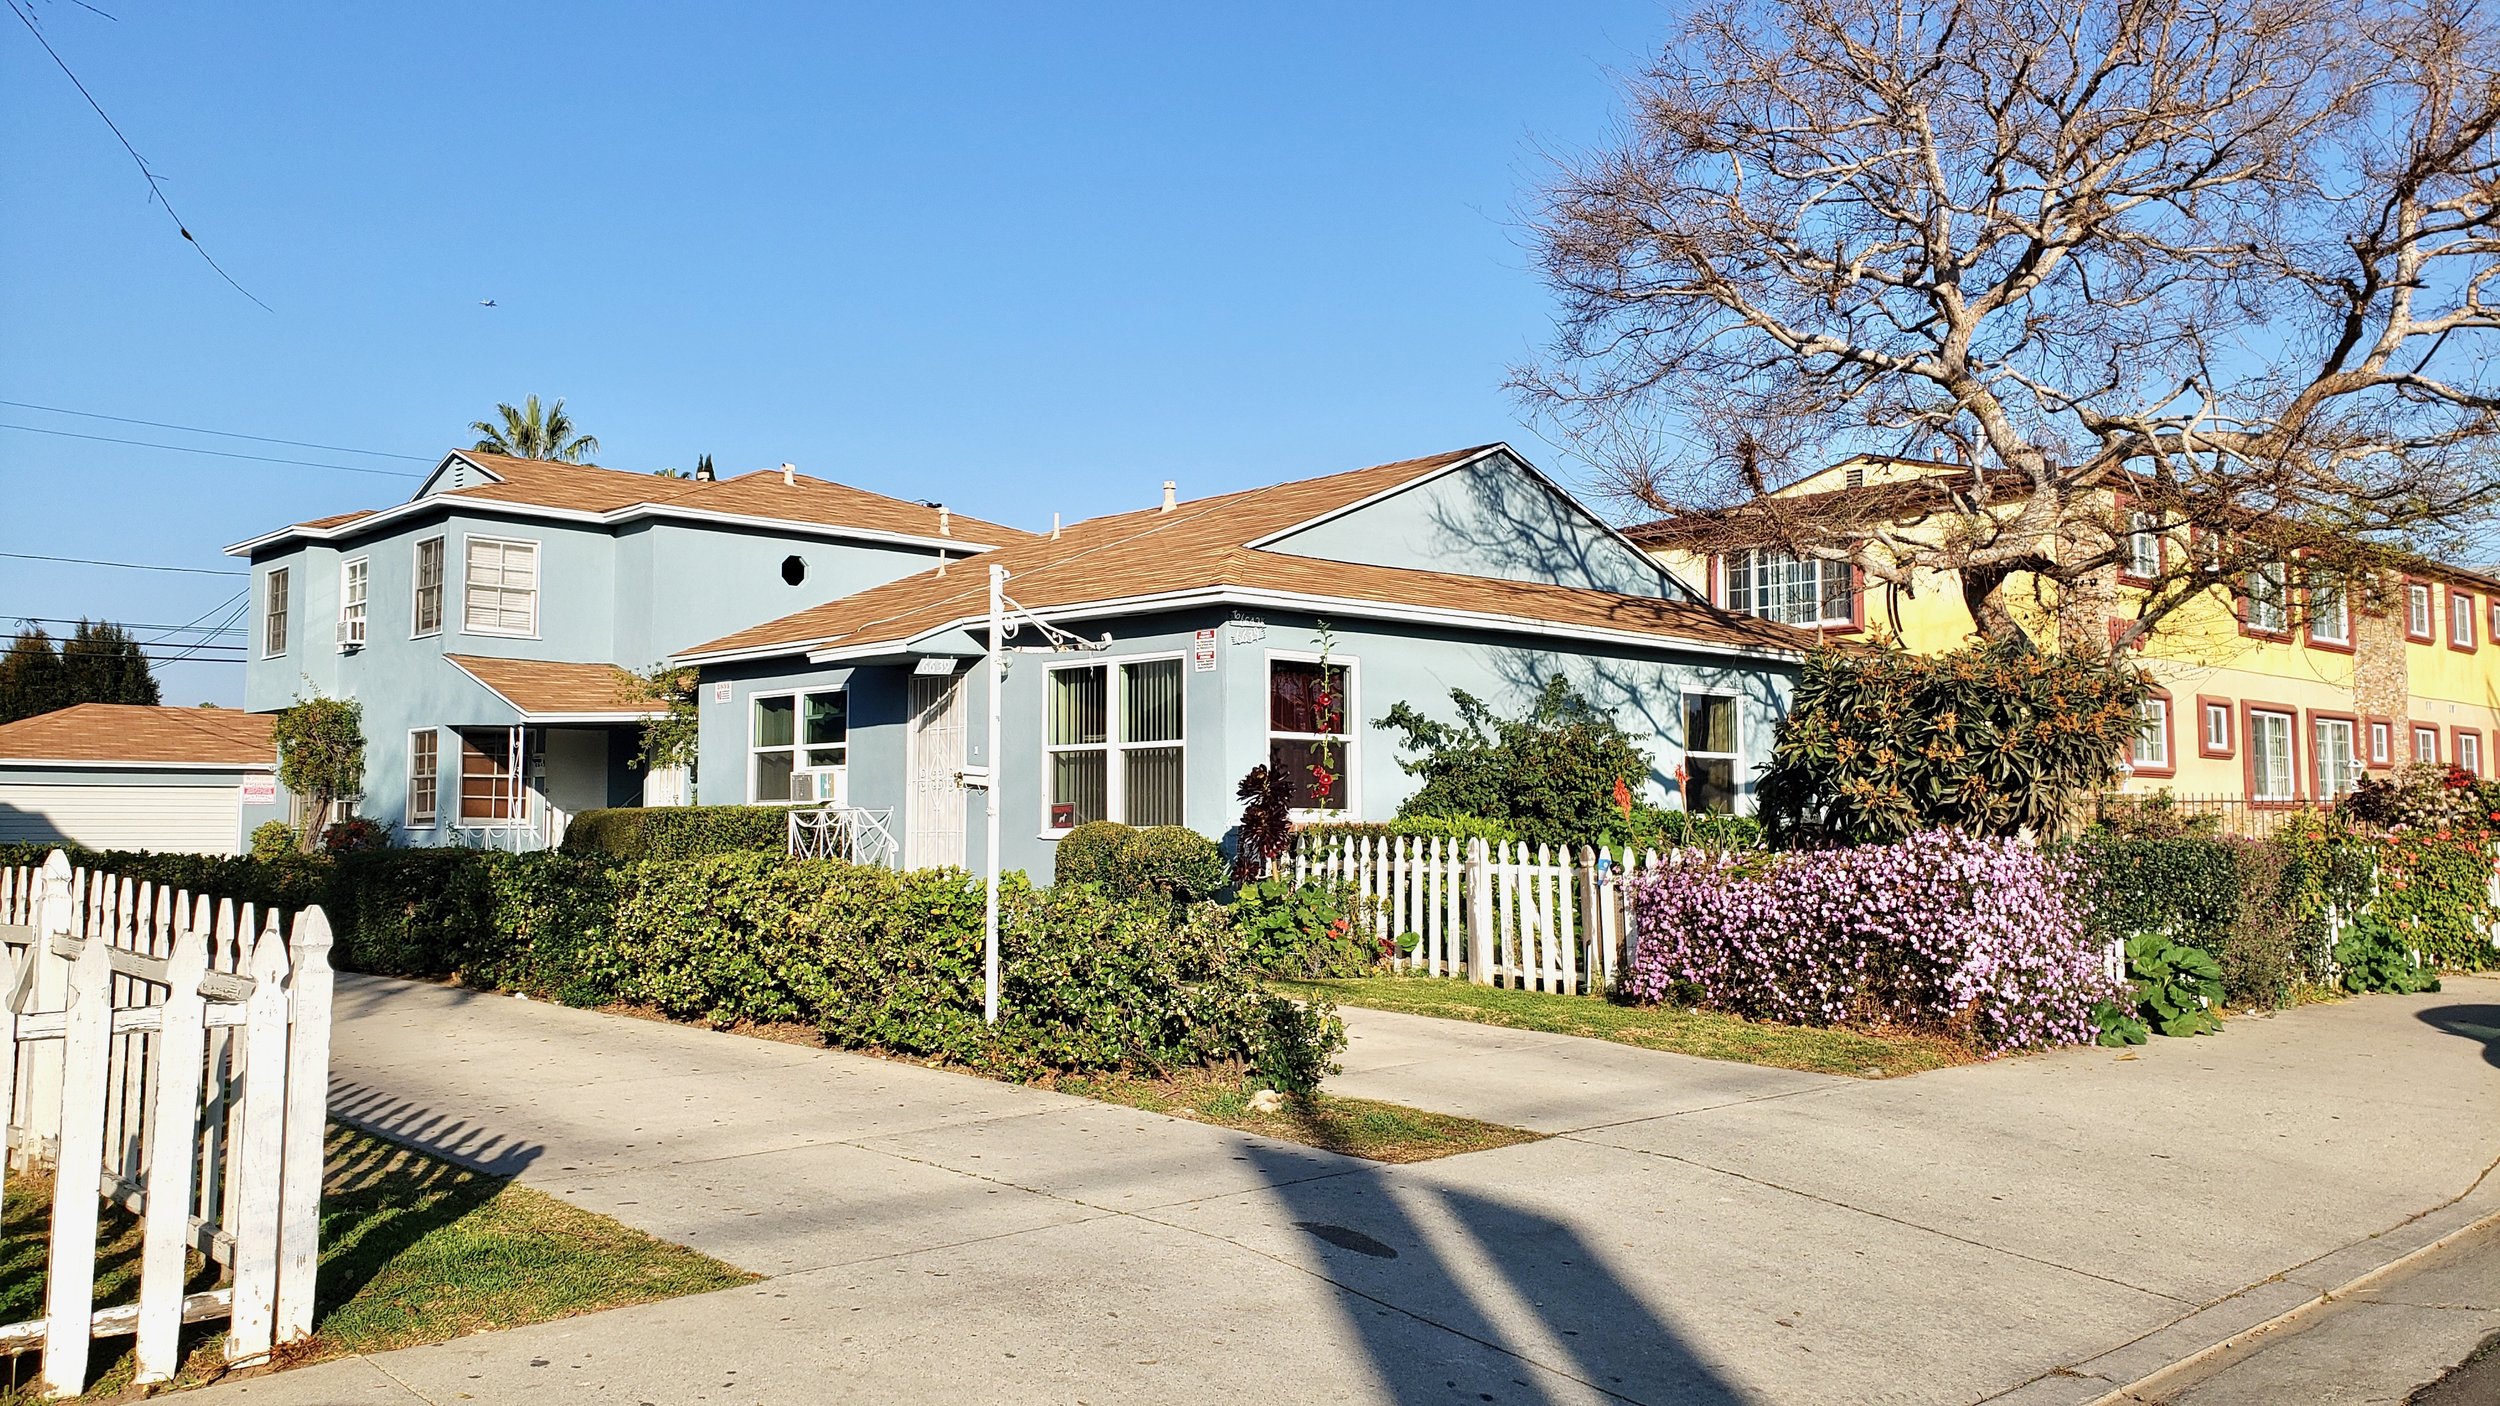 A serene residential scene showing a blue single-story house next to a two-story building under clear blue skies and trees.